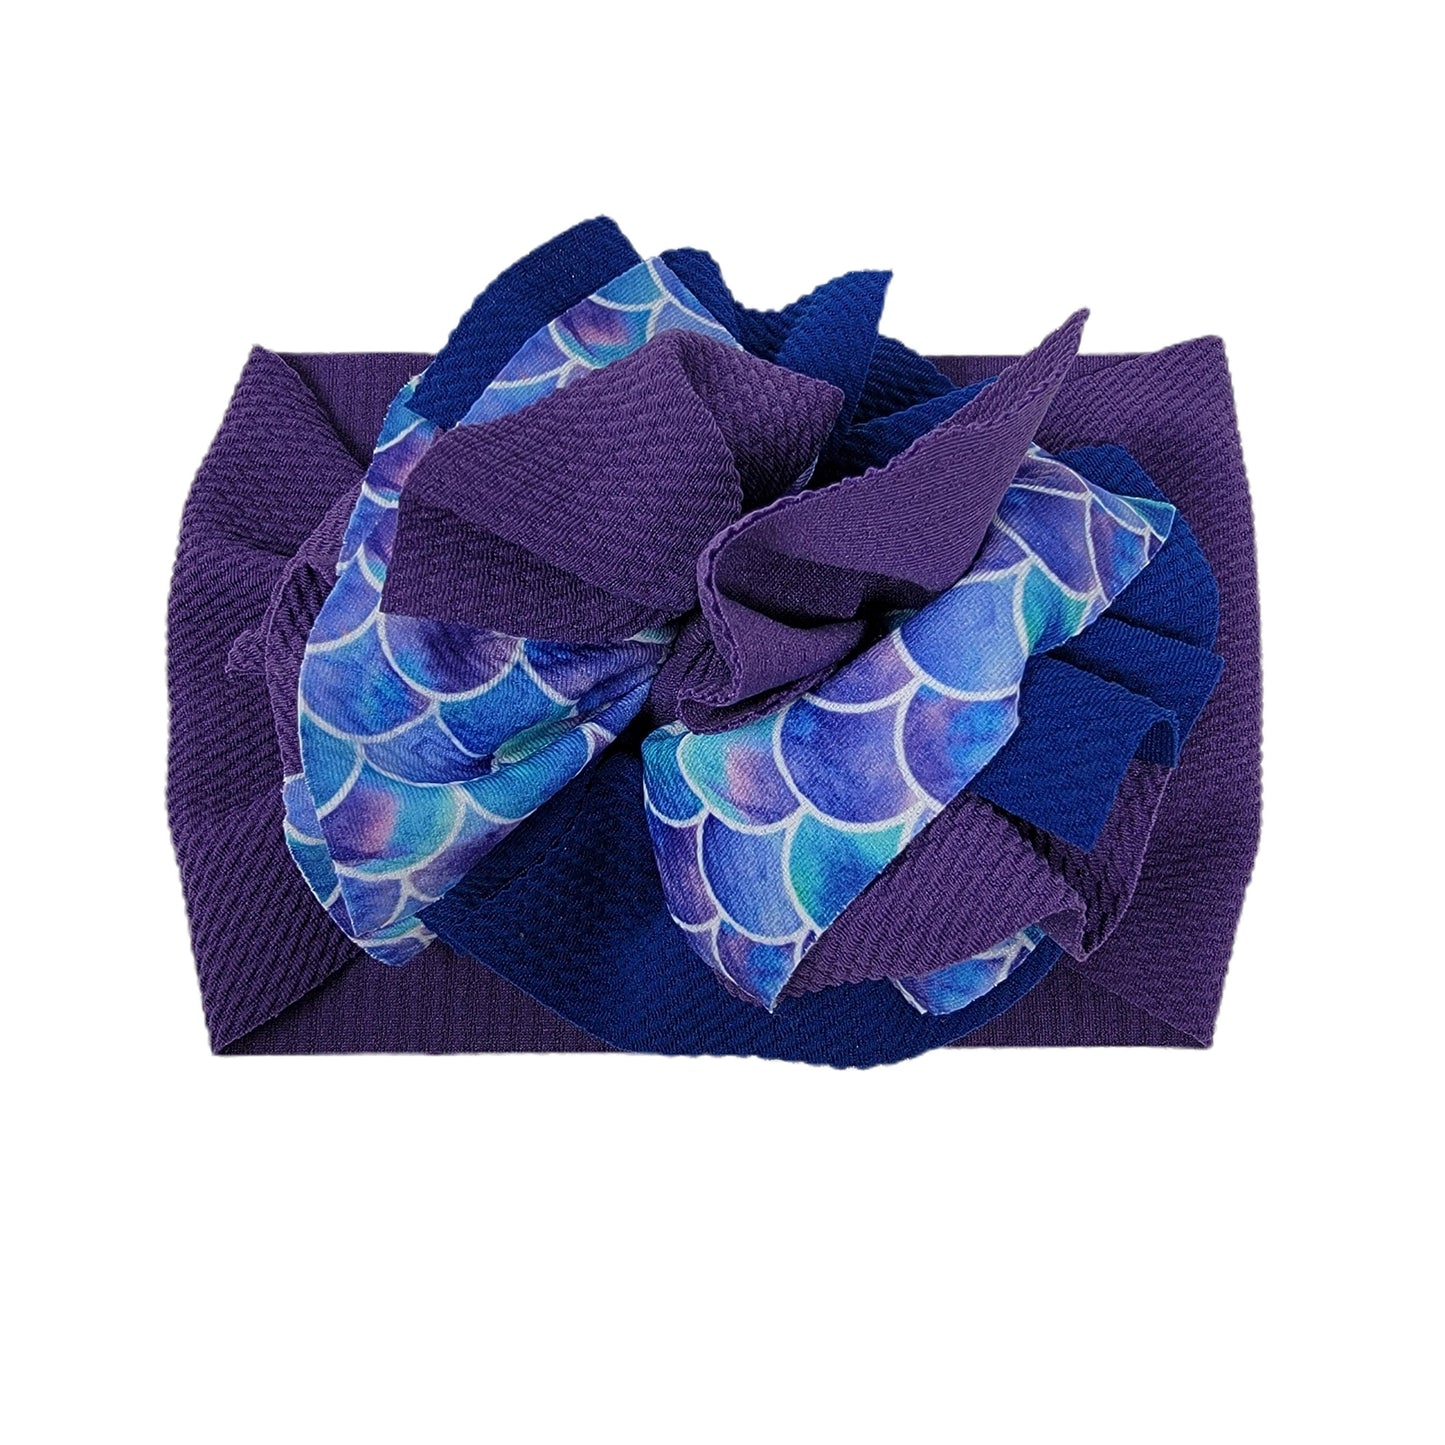 Blue Mermaids Scales Messy Fabric Headwrap 5" 